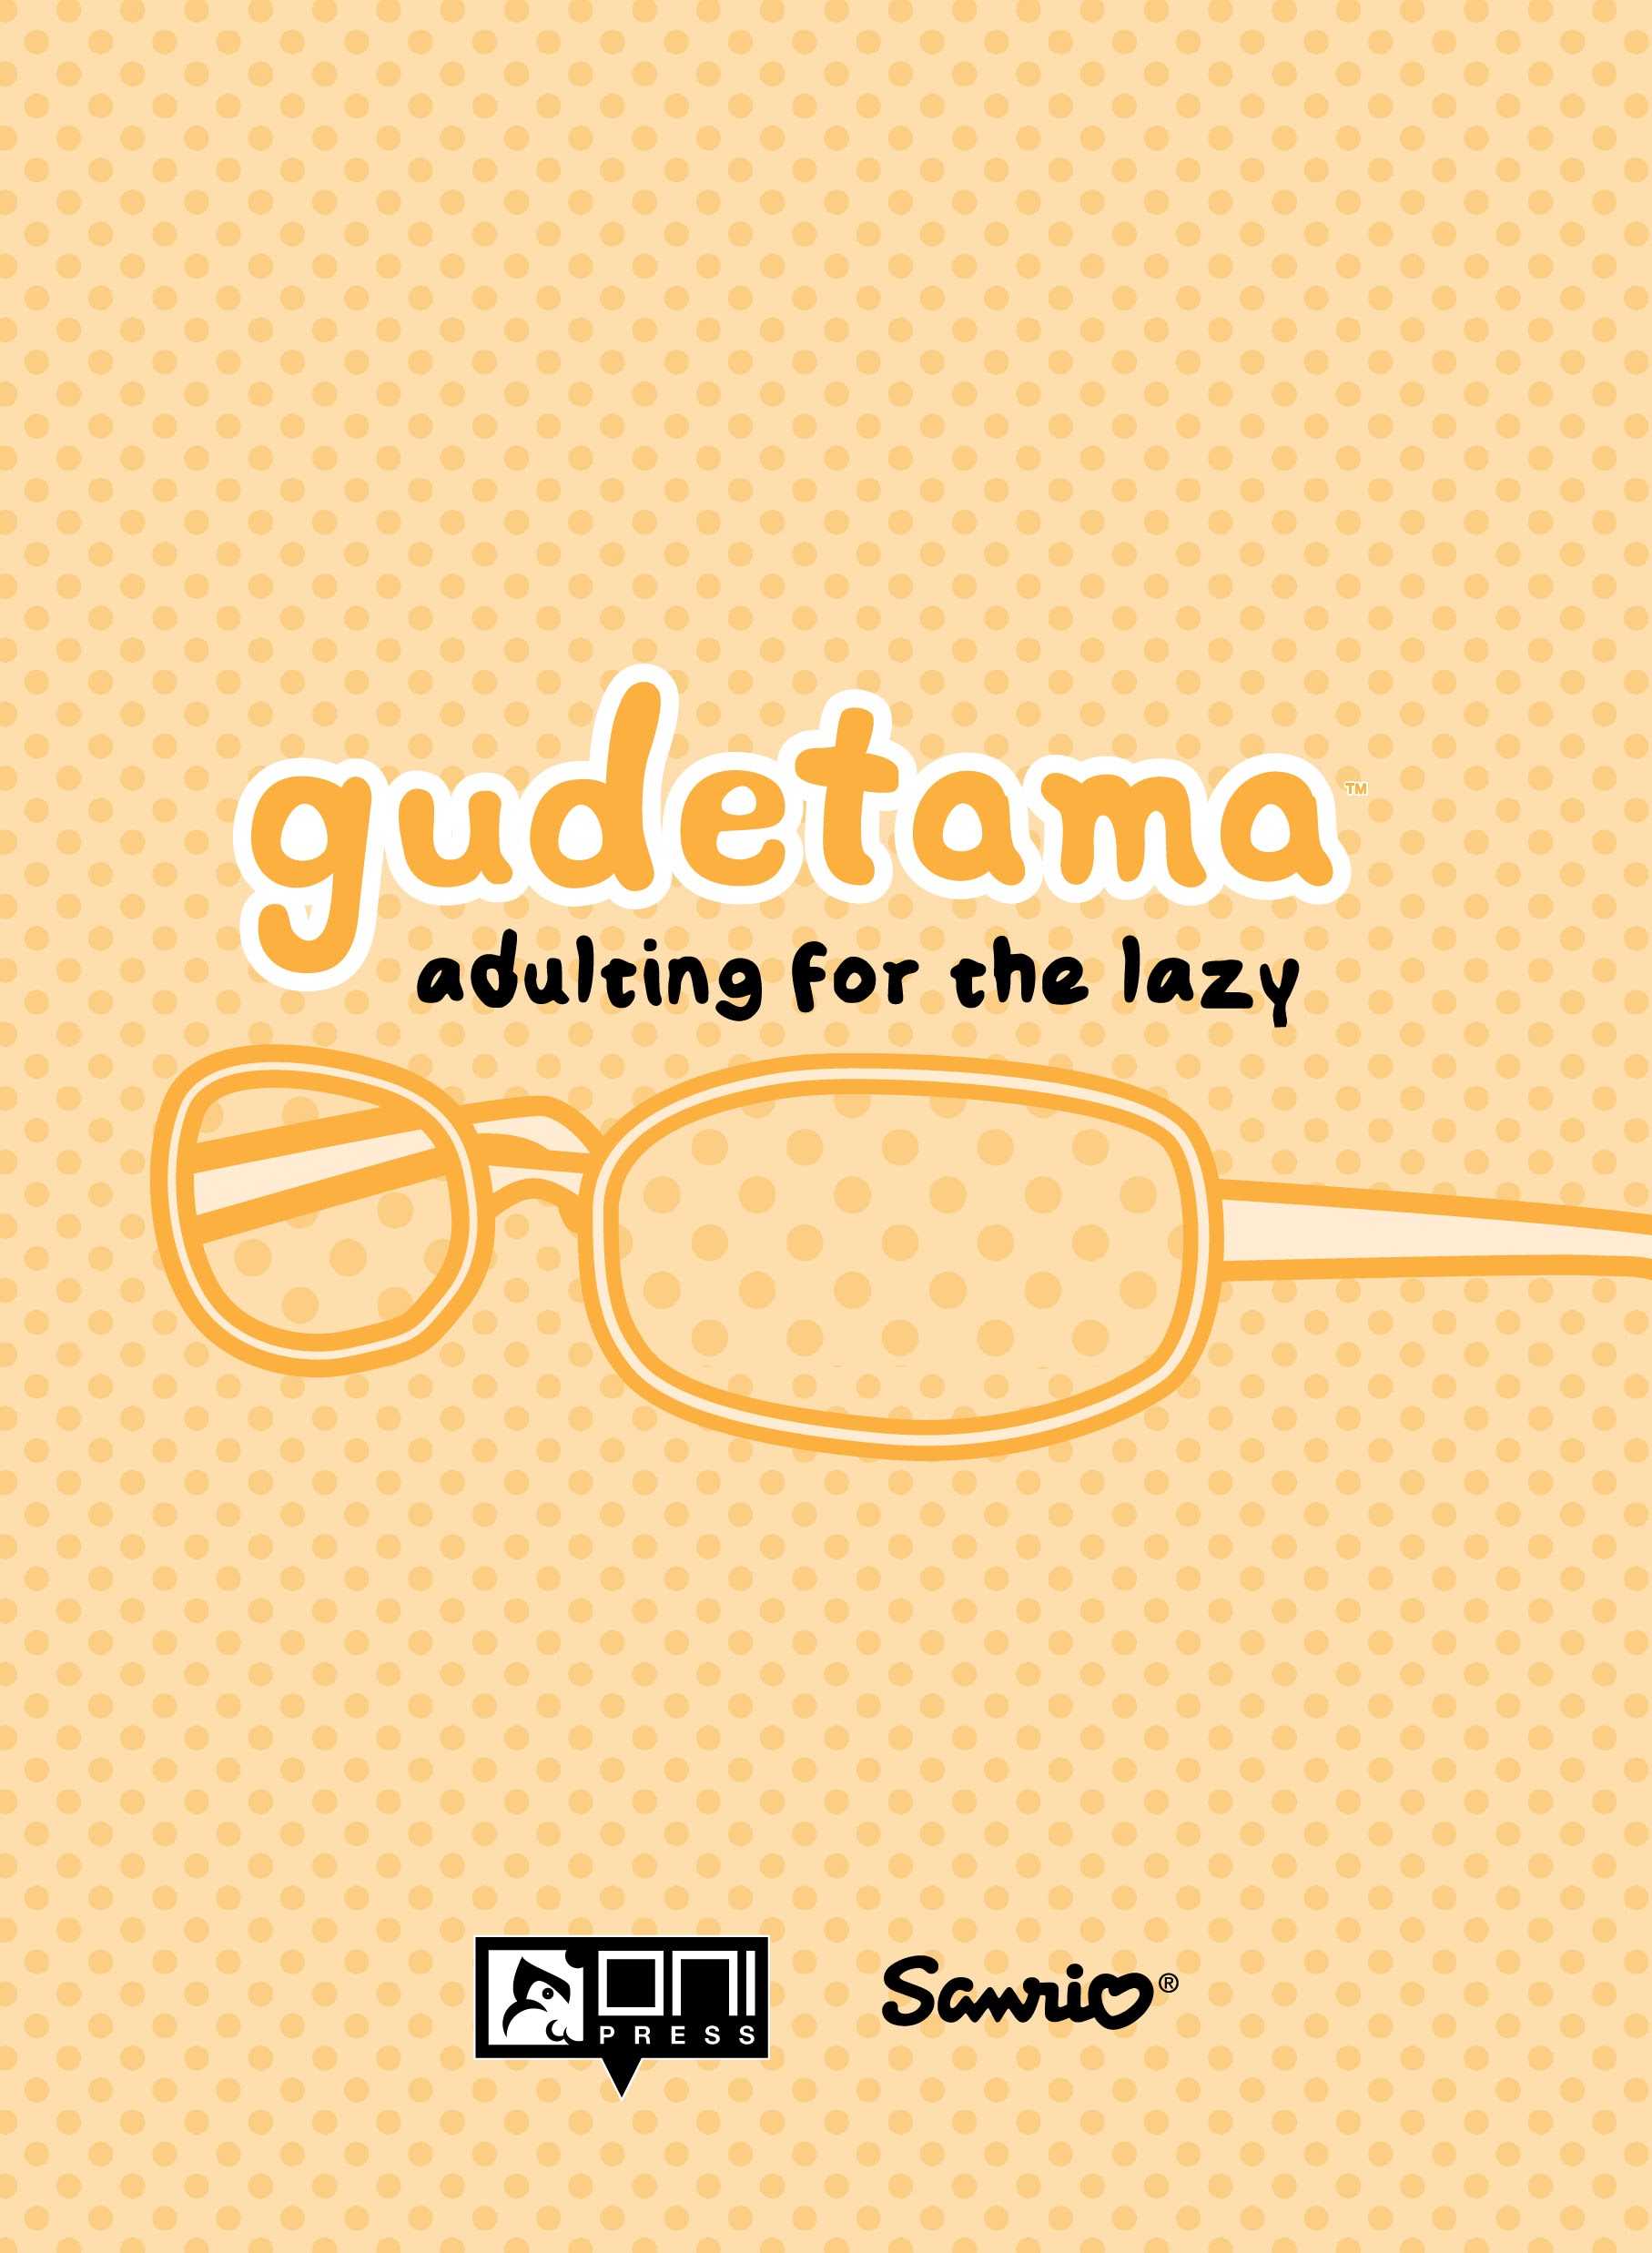 Read online Gudetama comic -  Issue # Adulting for the Lazy - 2